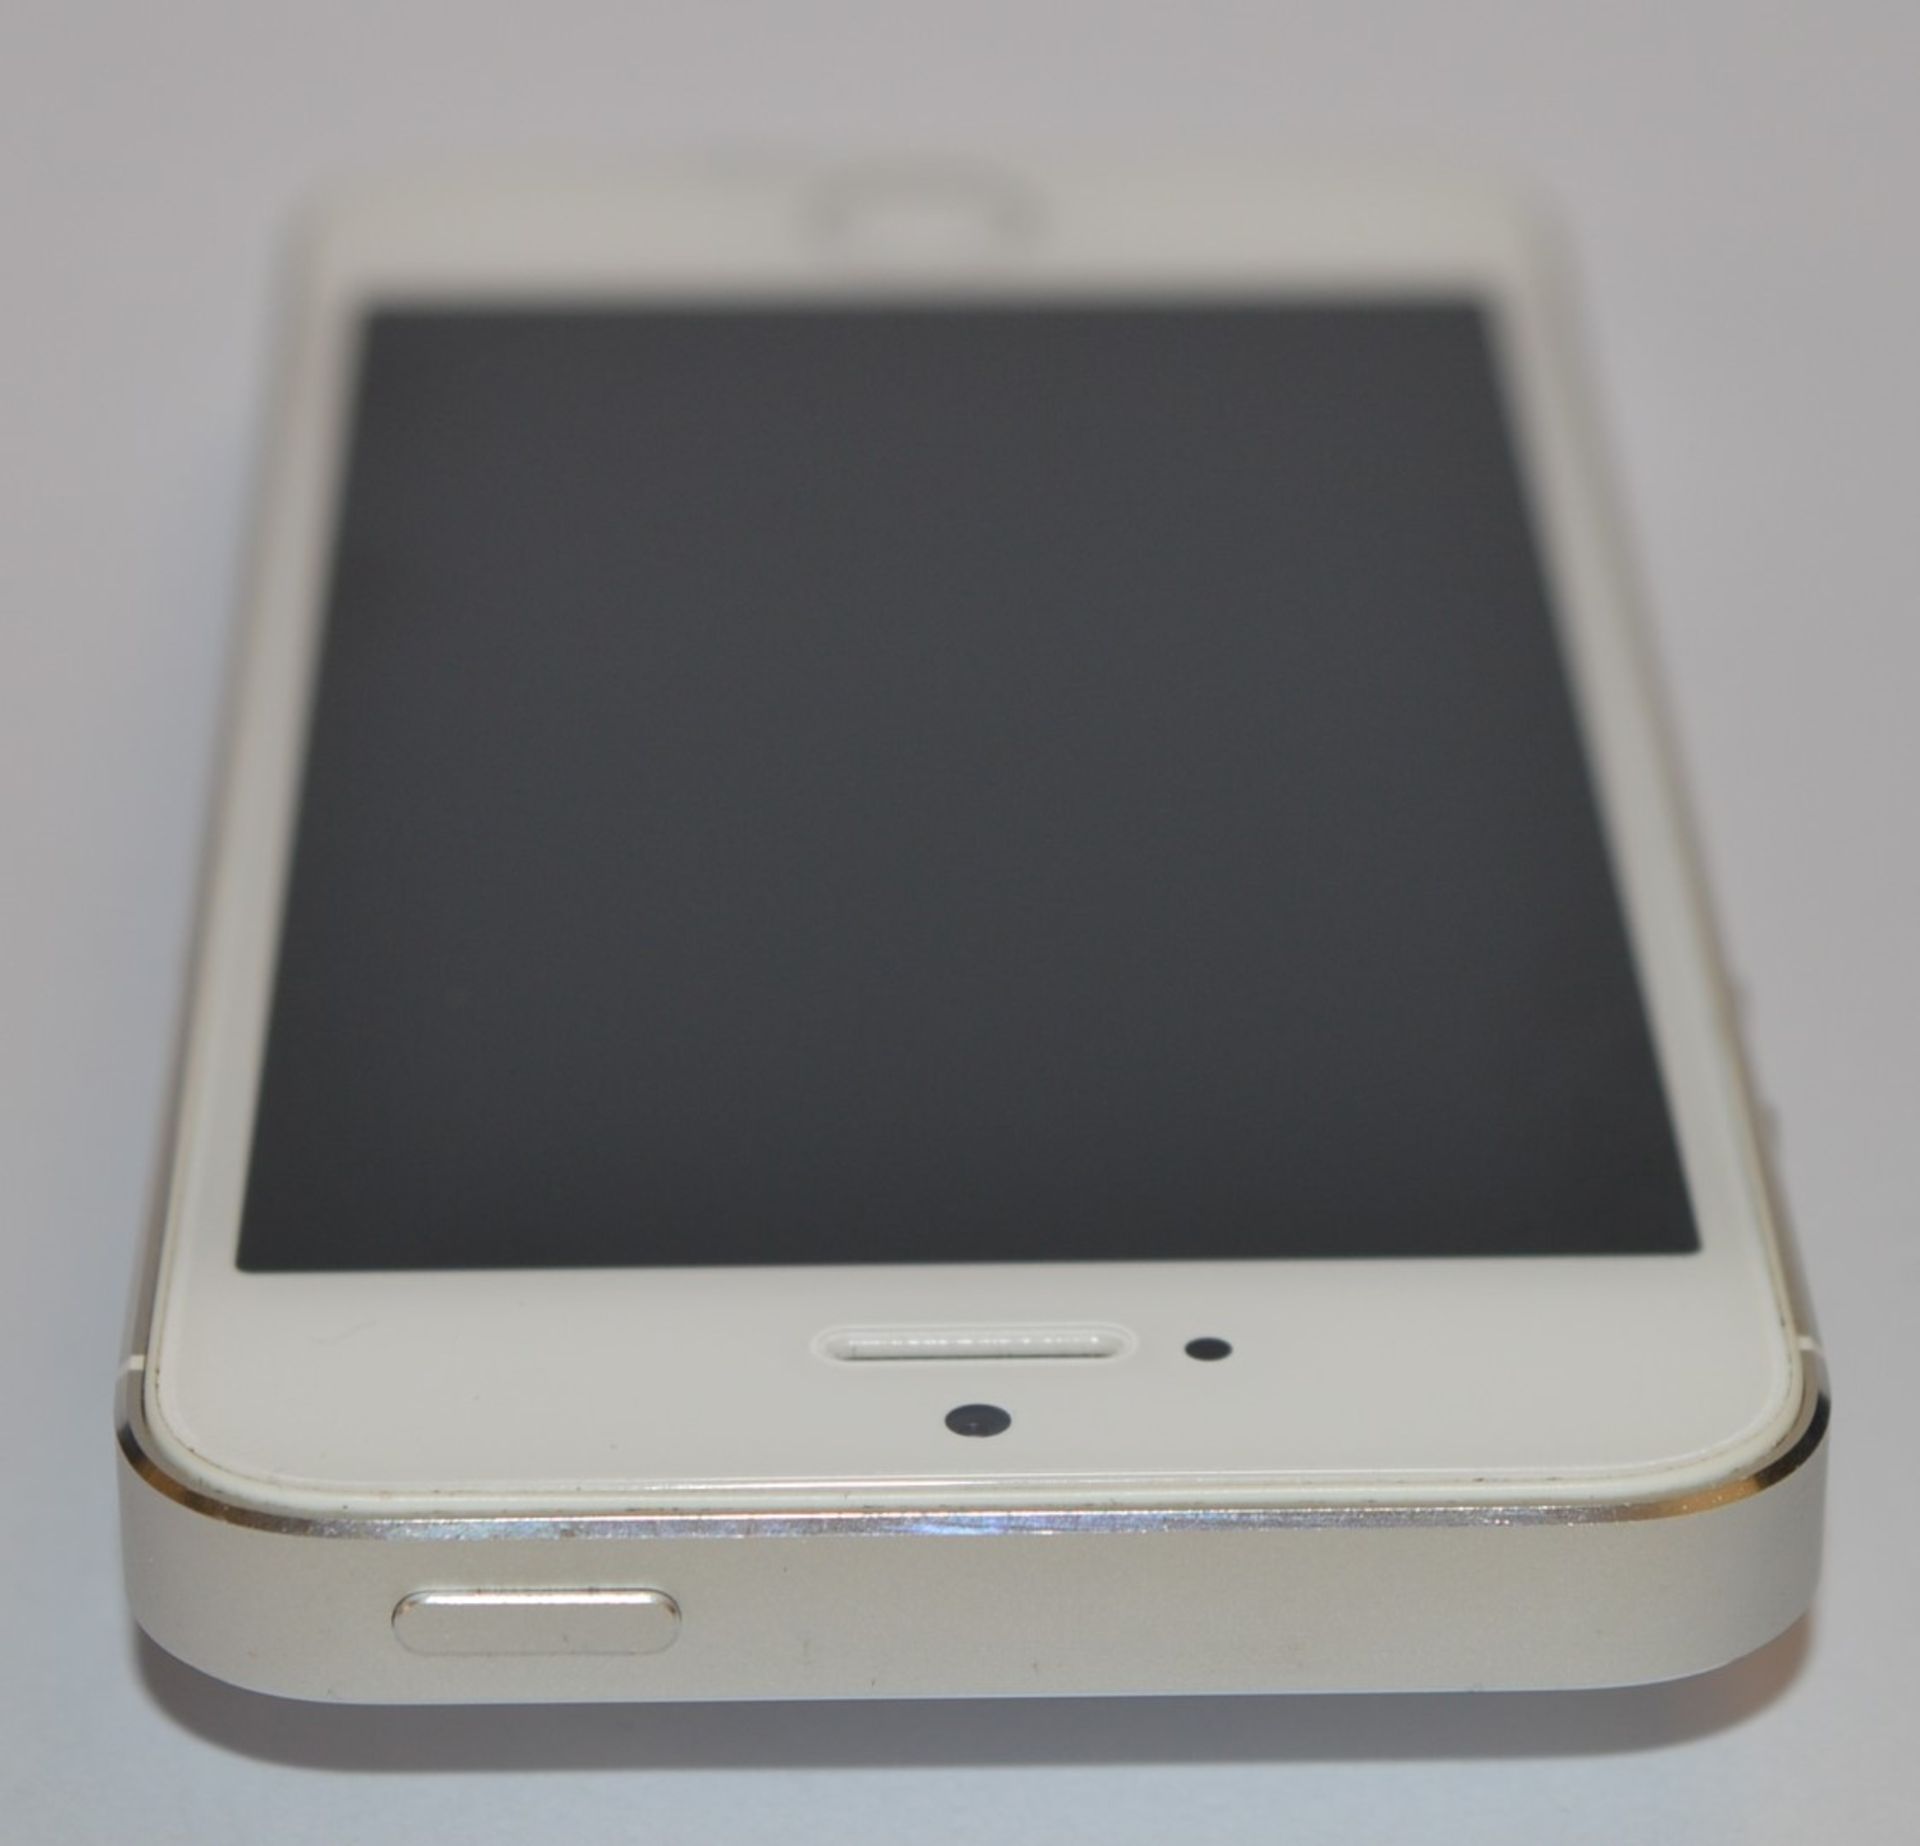 1 x Apple Iphone 5S White 32gb Mobile Phone - Model A1457 - Excellent Cosmetic Condition - Good - Image 6 of 15